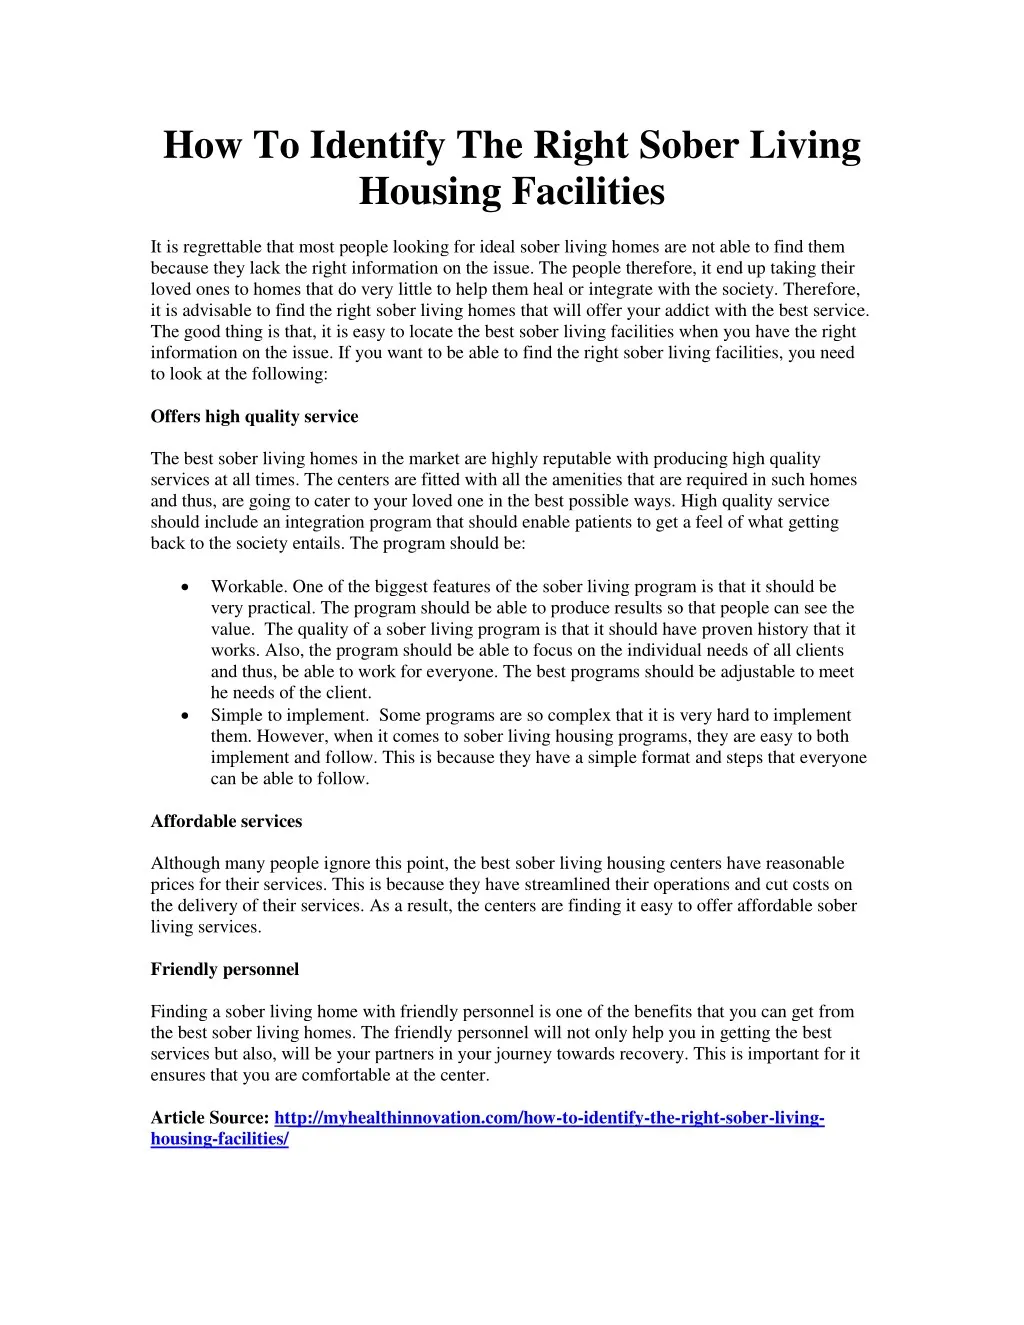 how to identify the right sober living housing